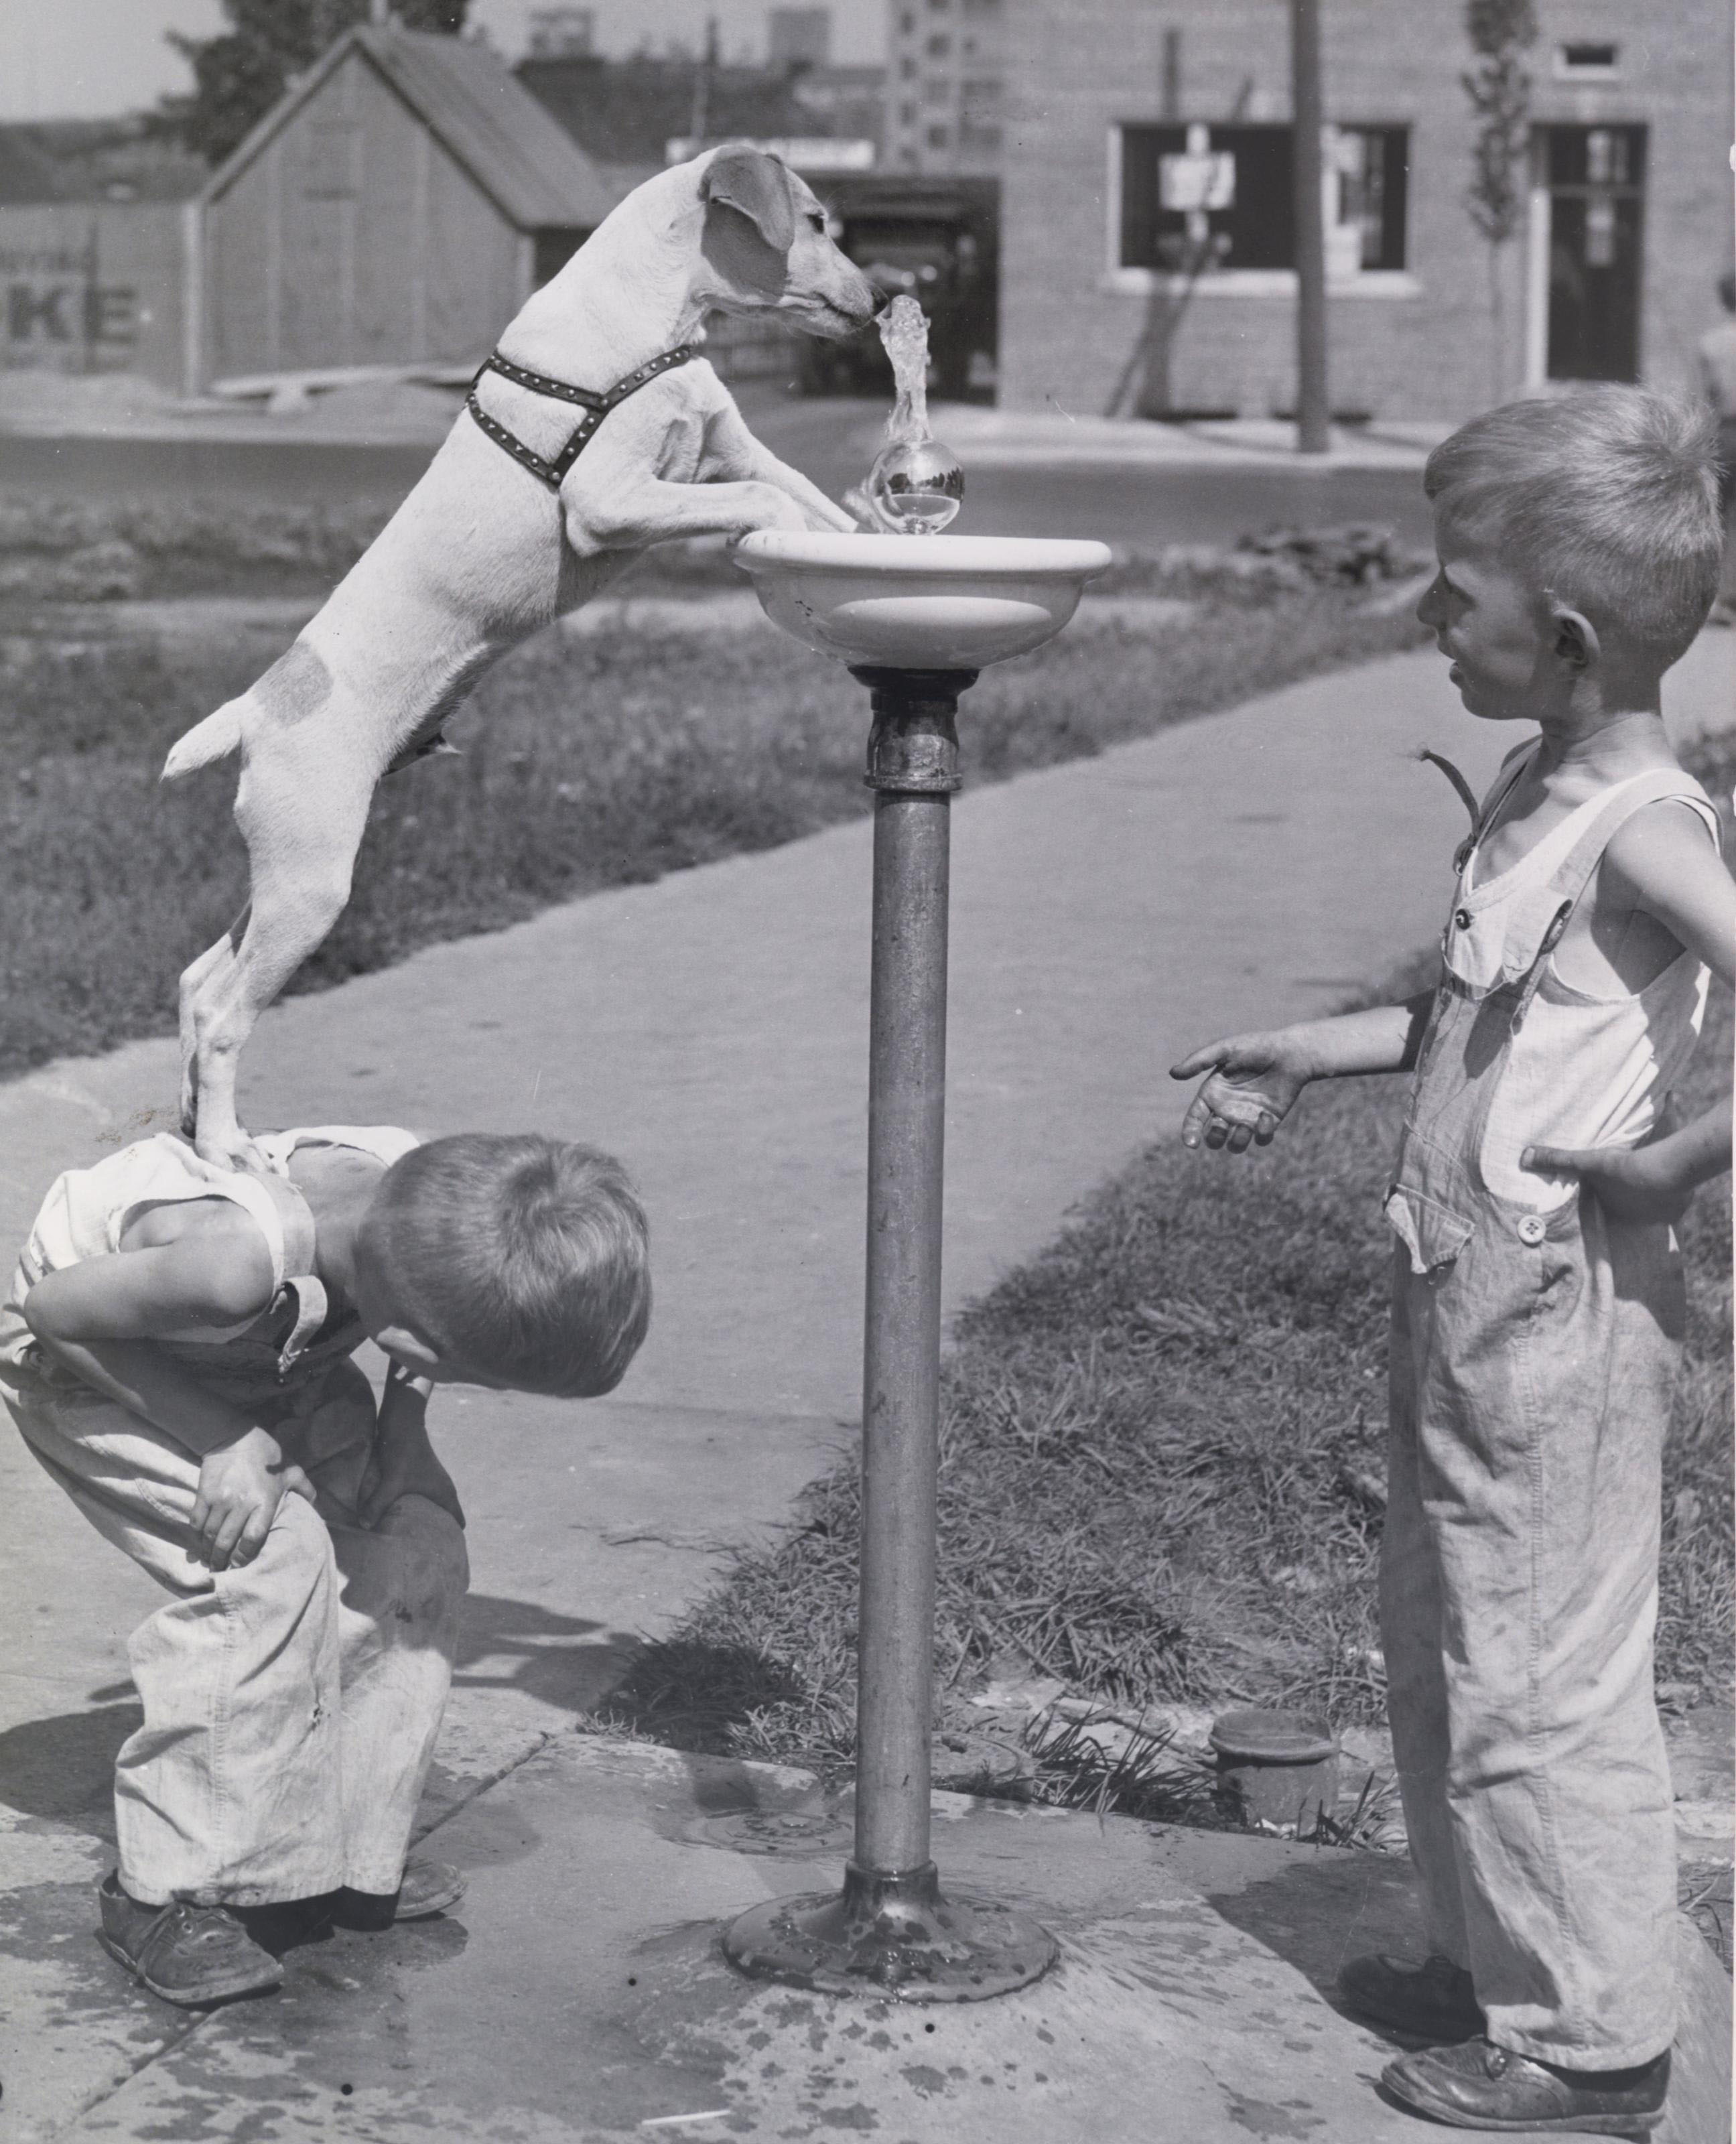 Giving a pal a boost on a hot day, August 28, 1938.jpg